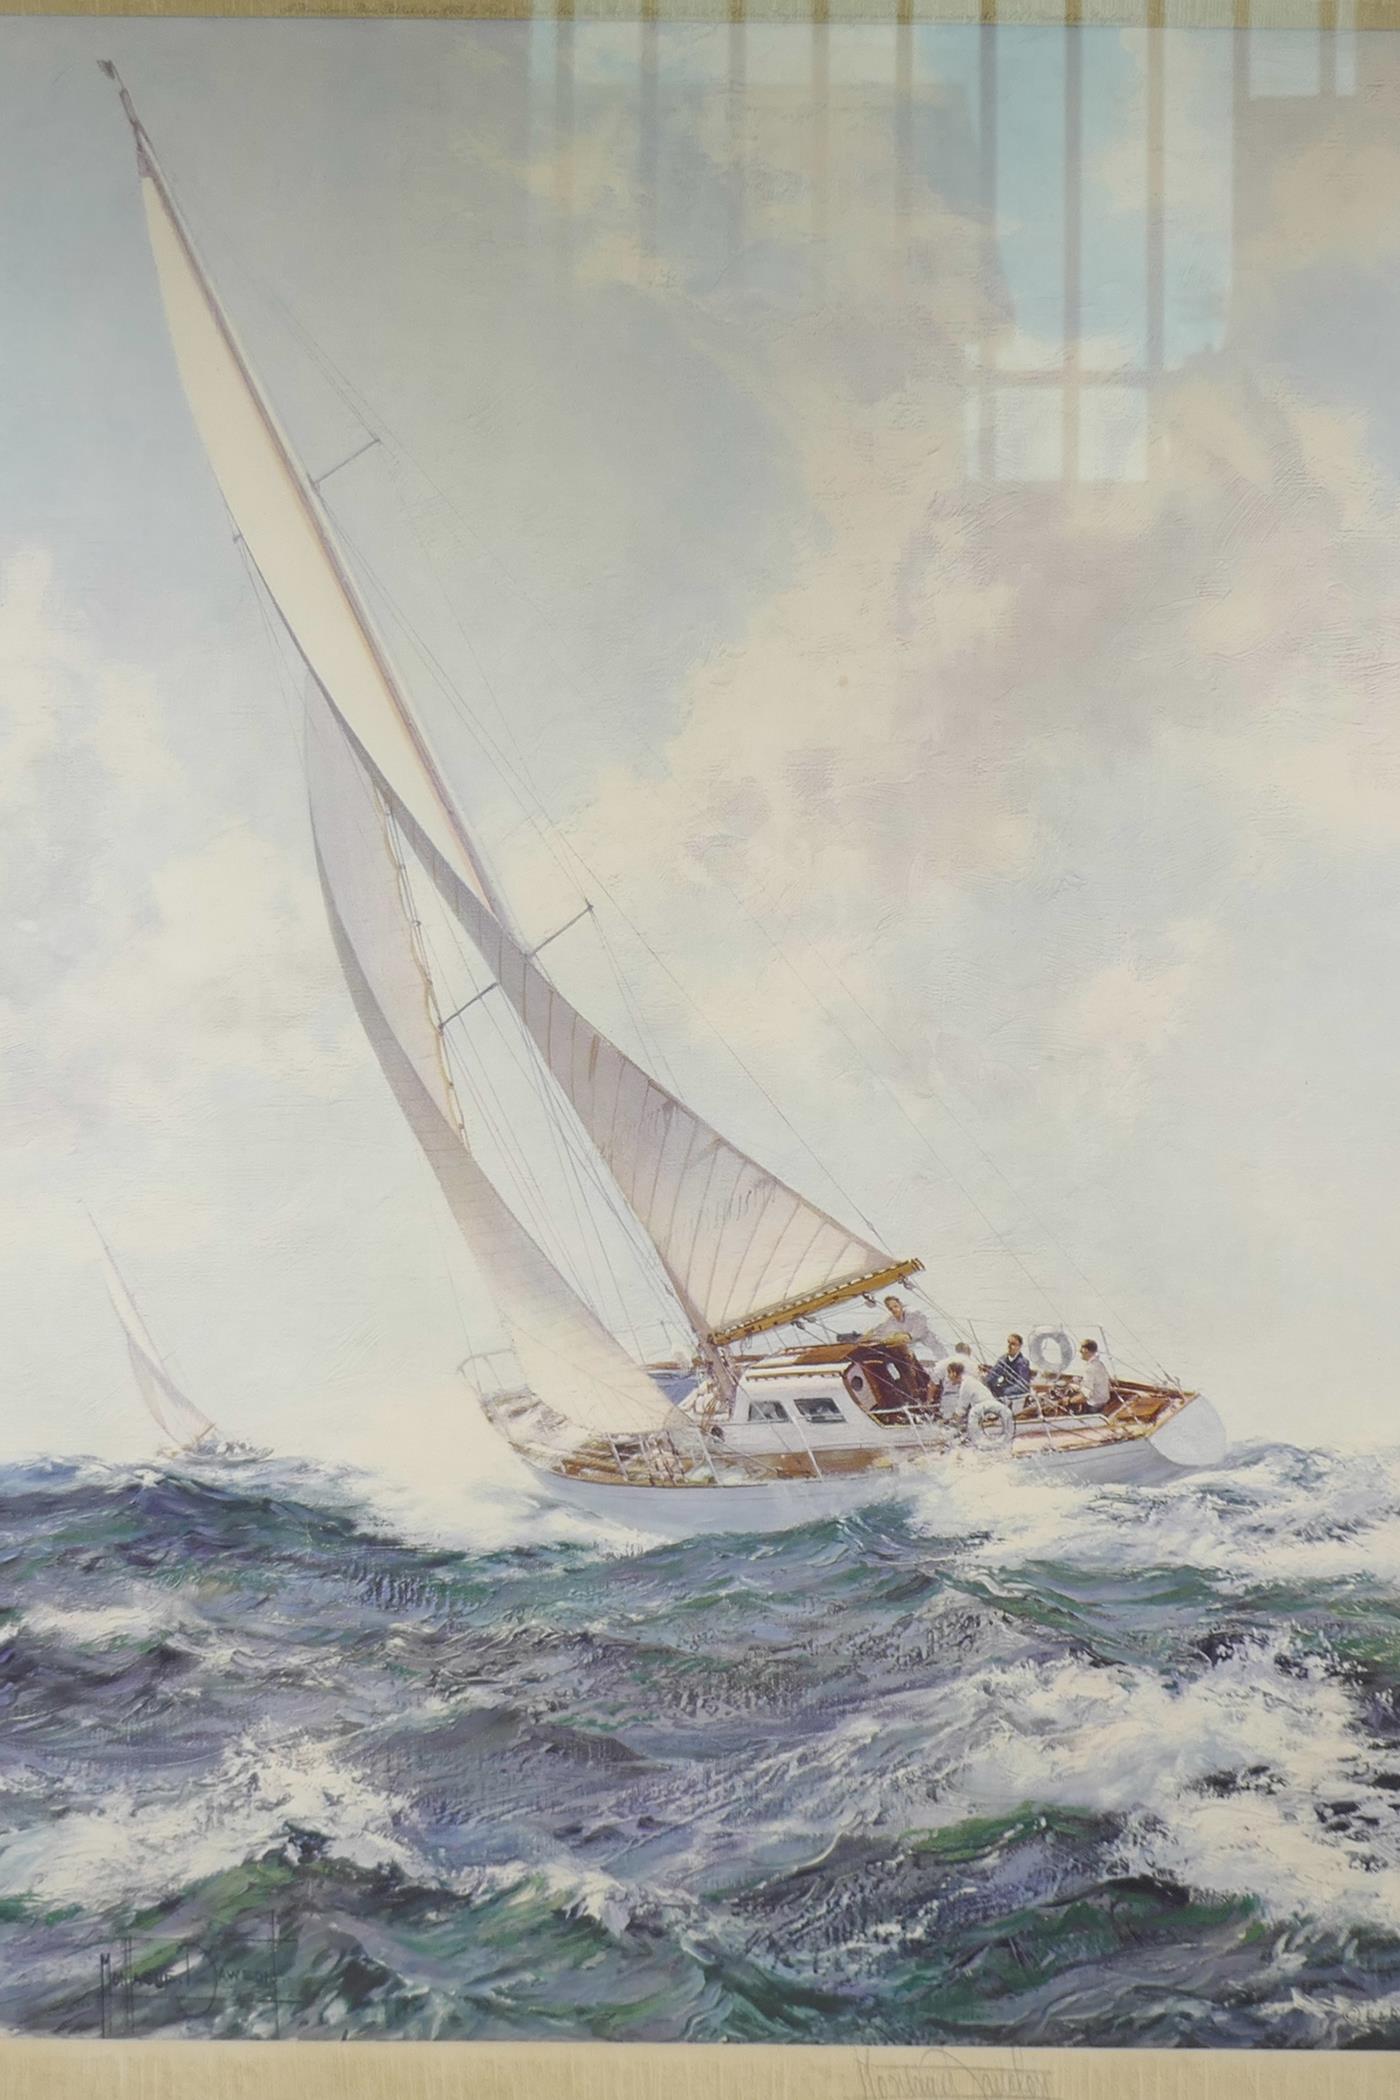 Montague Dawson, lithograph of sailing yachts at sea, pencil signed in the margin, 19" x 28" - Image 2 of 4